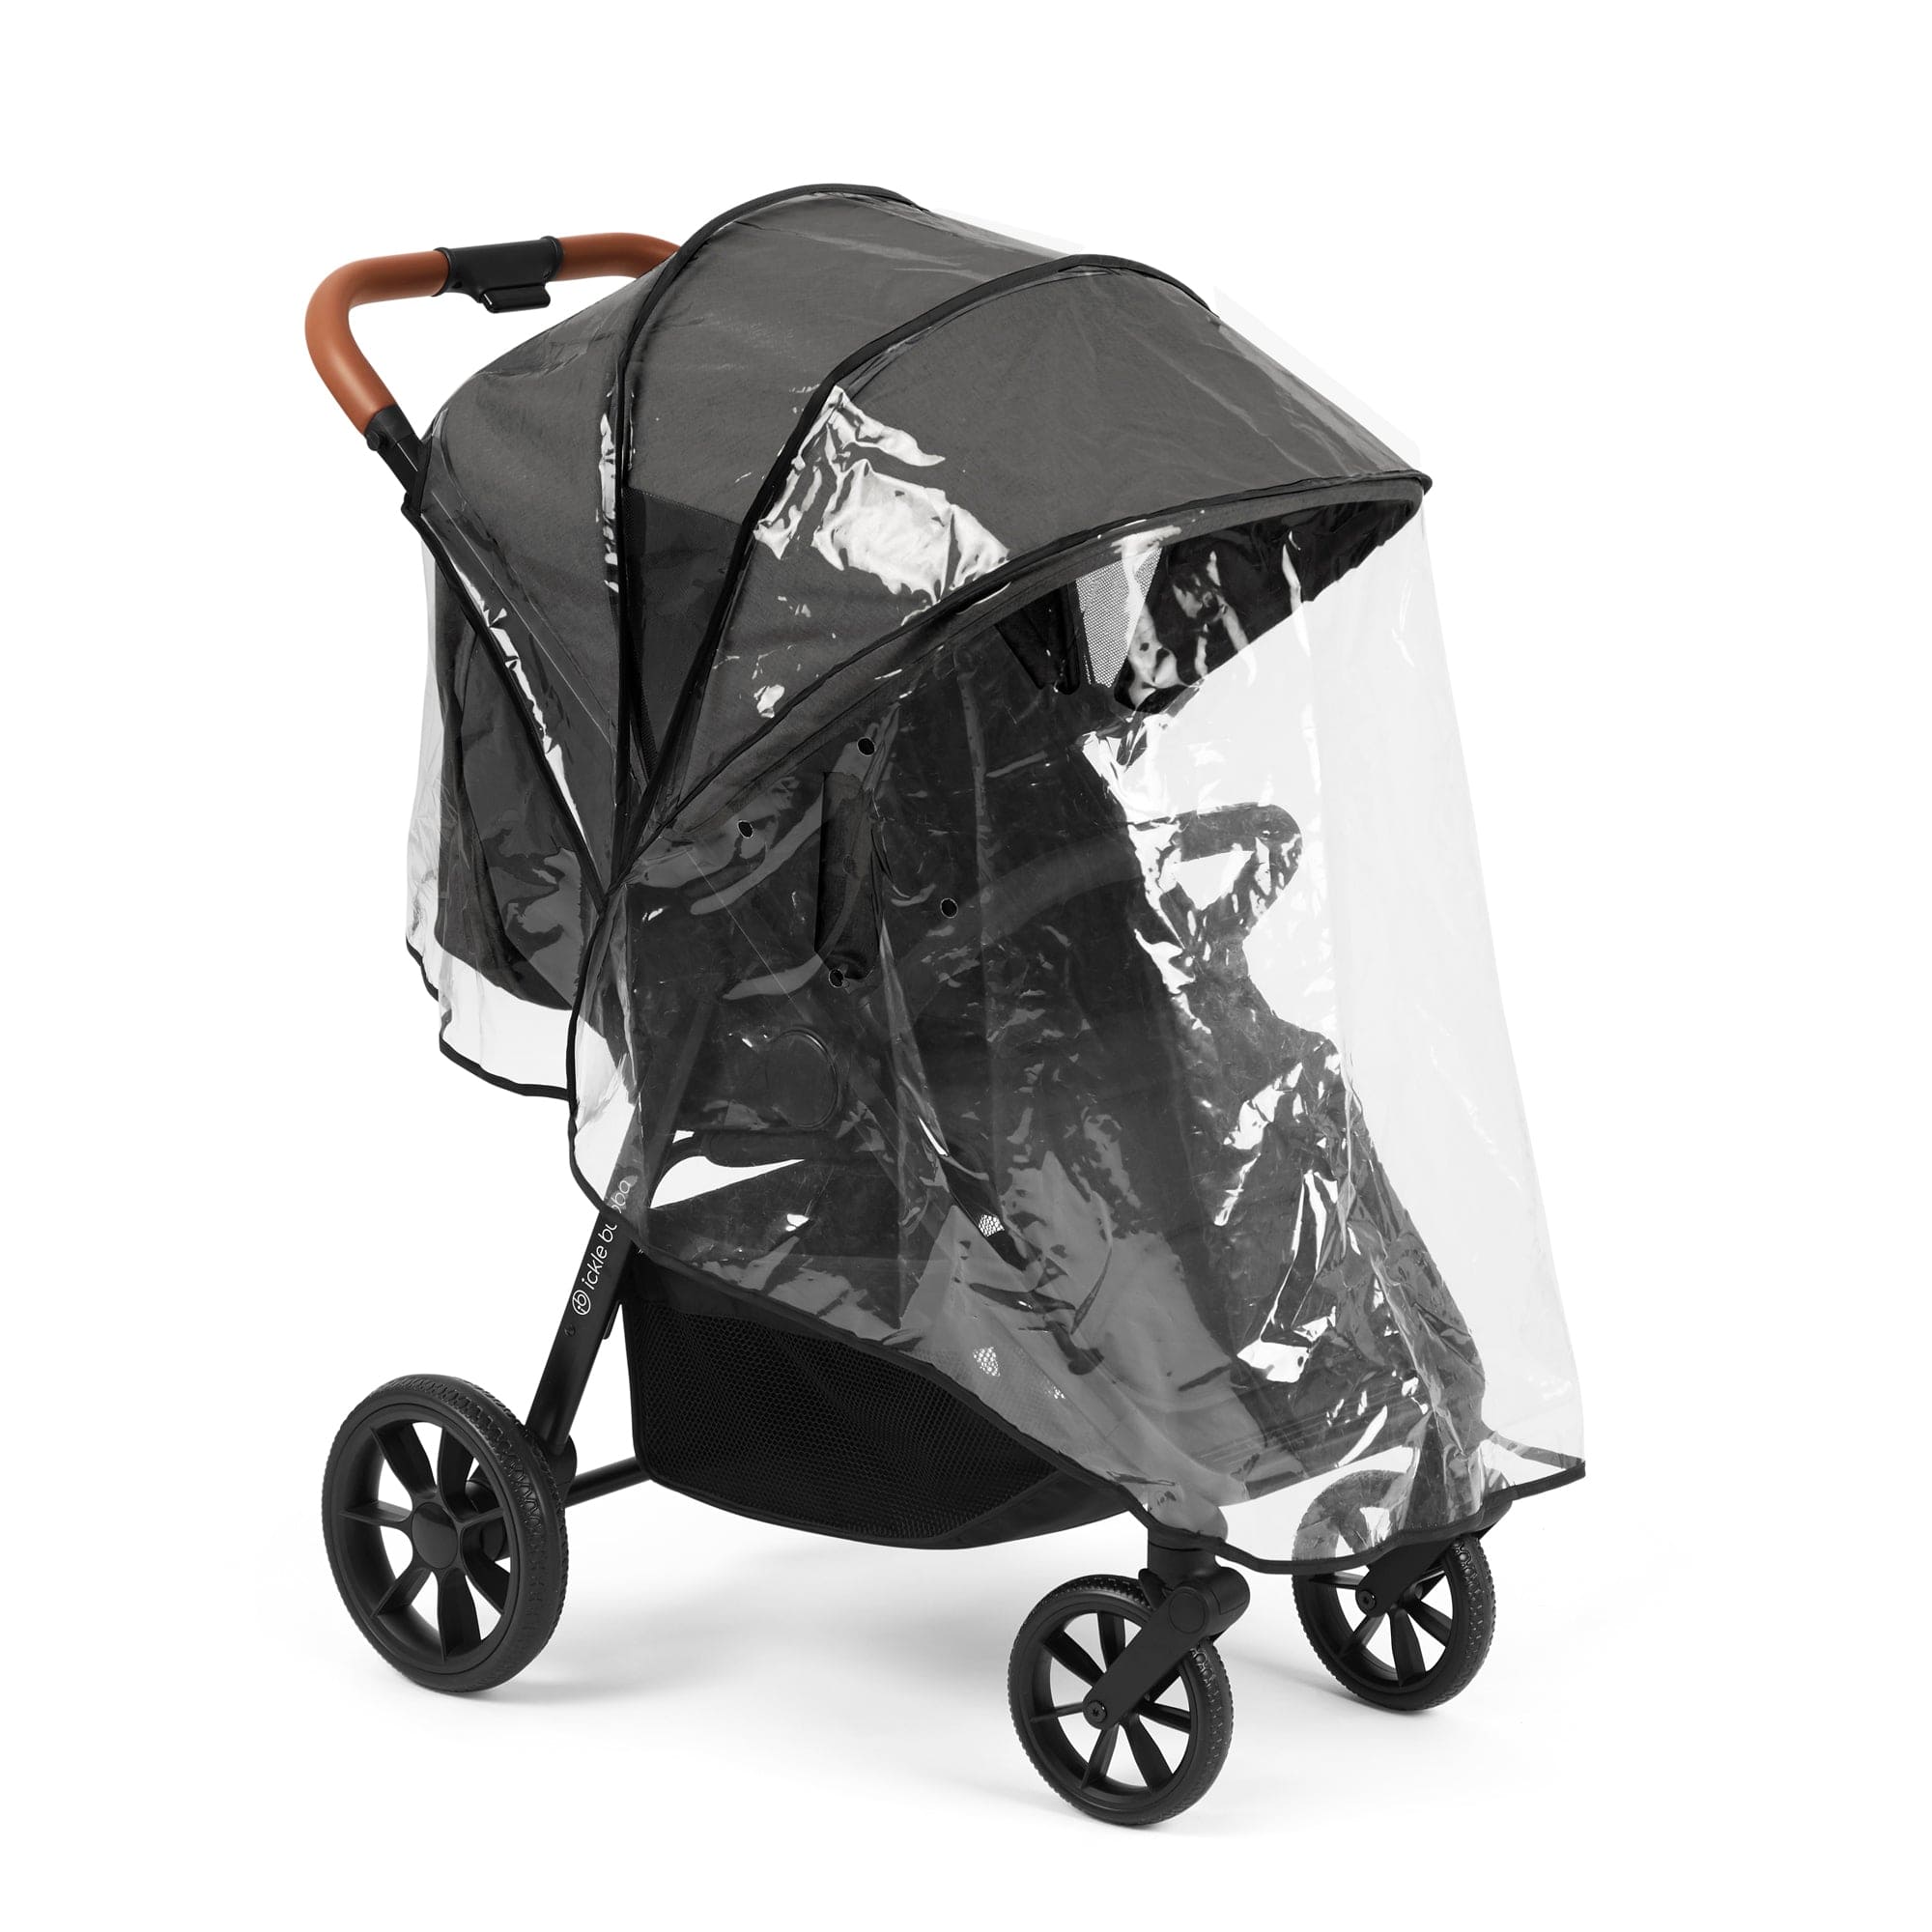 Ickle Bubba Pushchairs & Buggies STOMP STRIDE Pushchair in (Charcoal Grey) 15-006-100-148